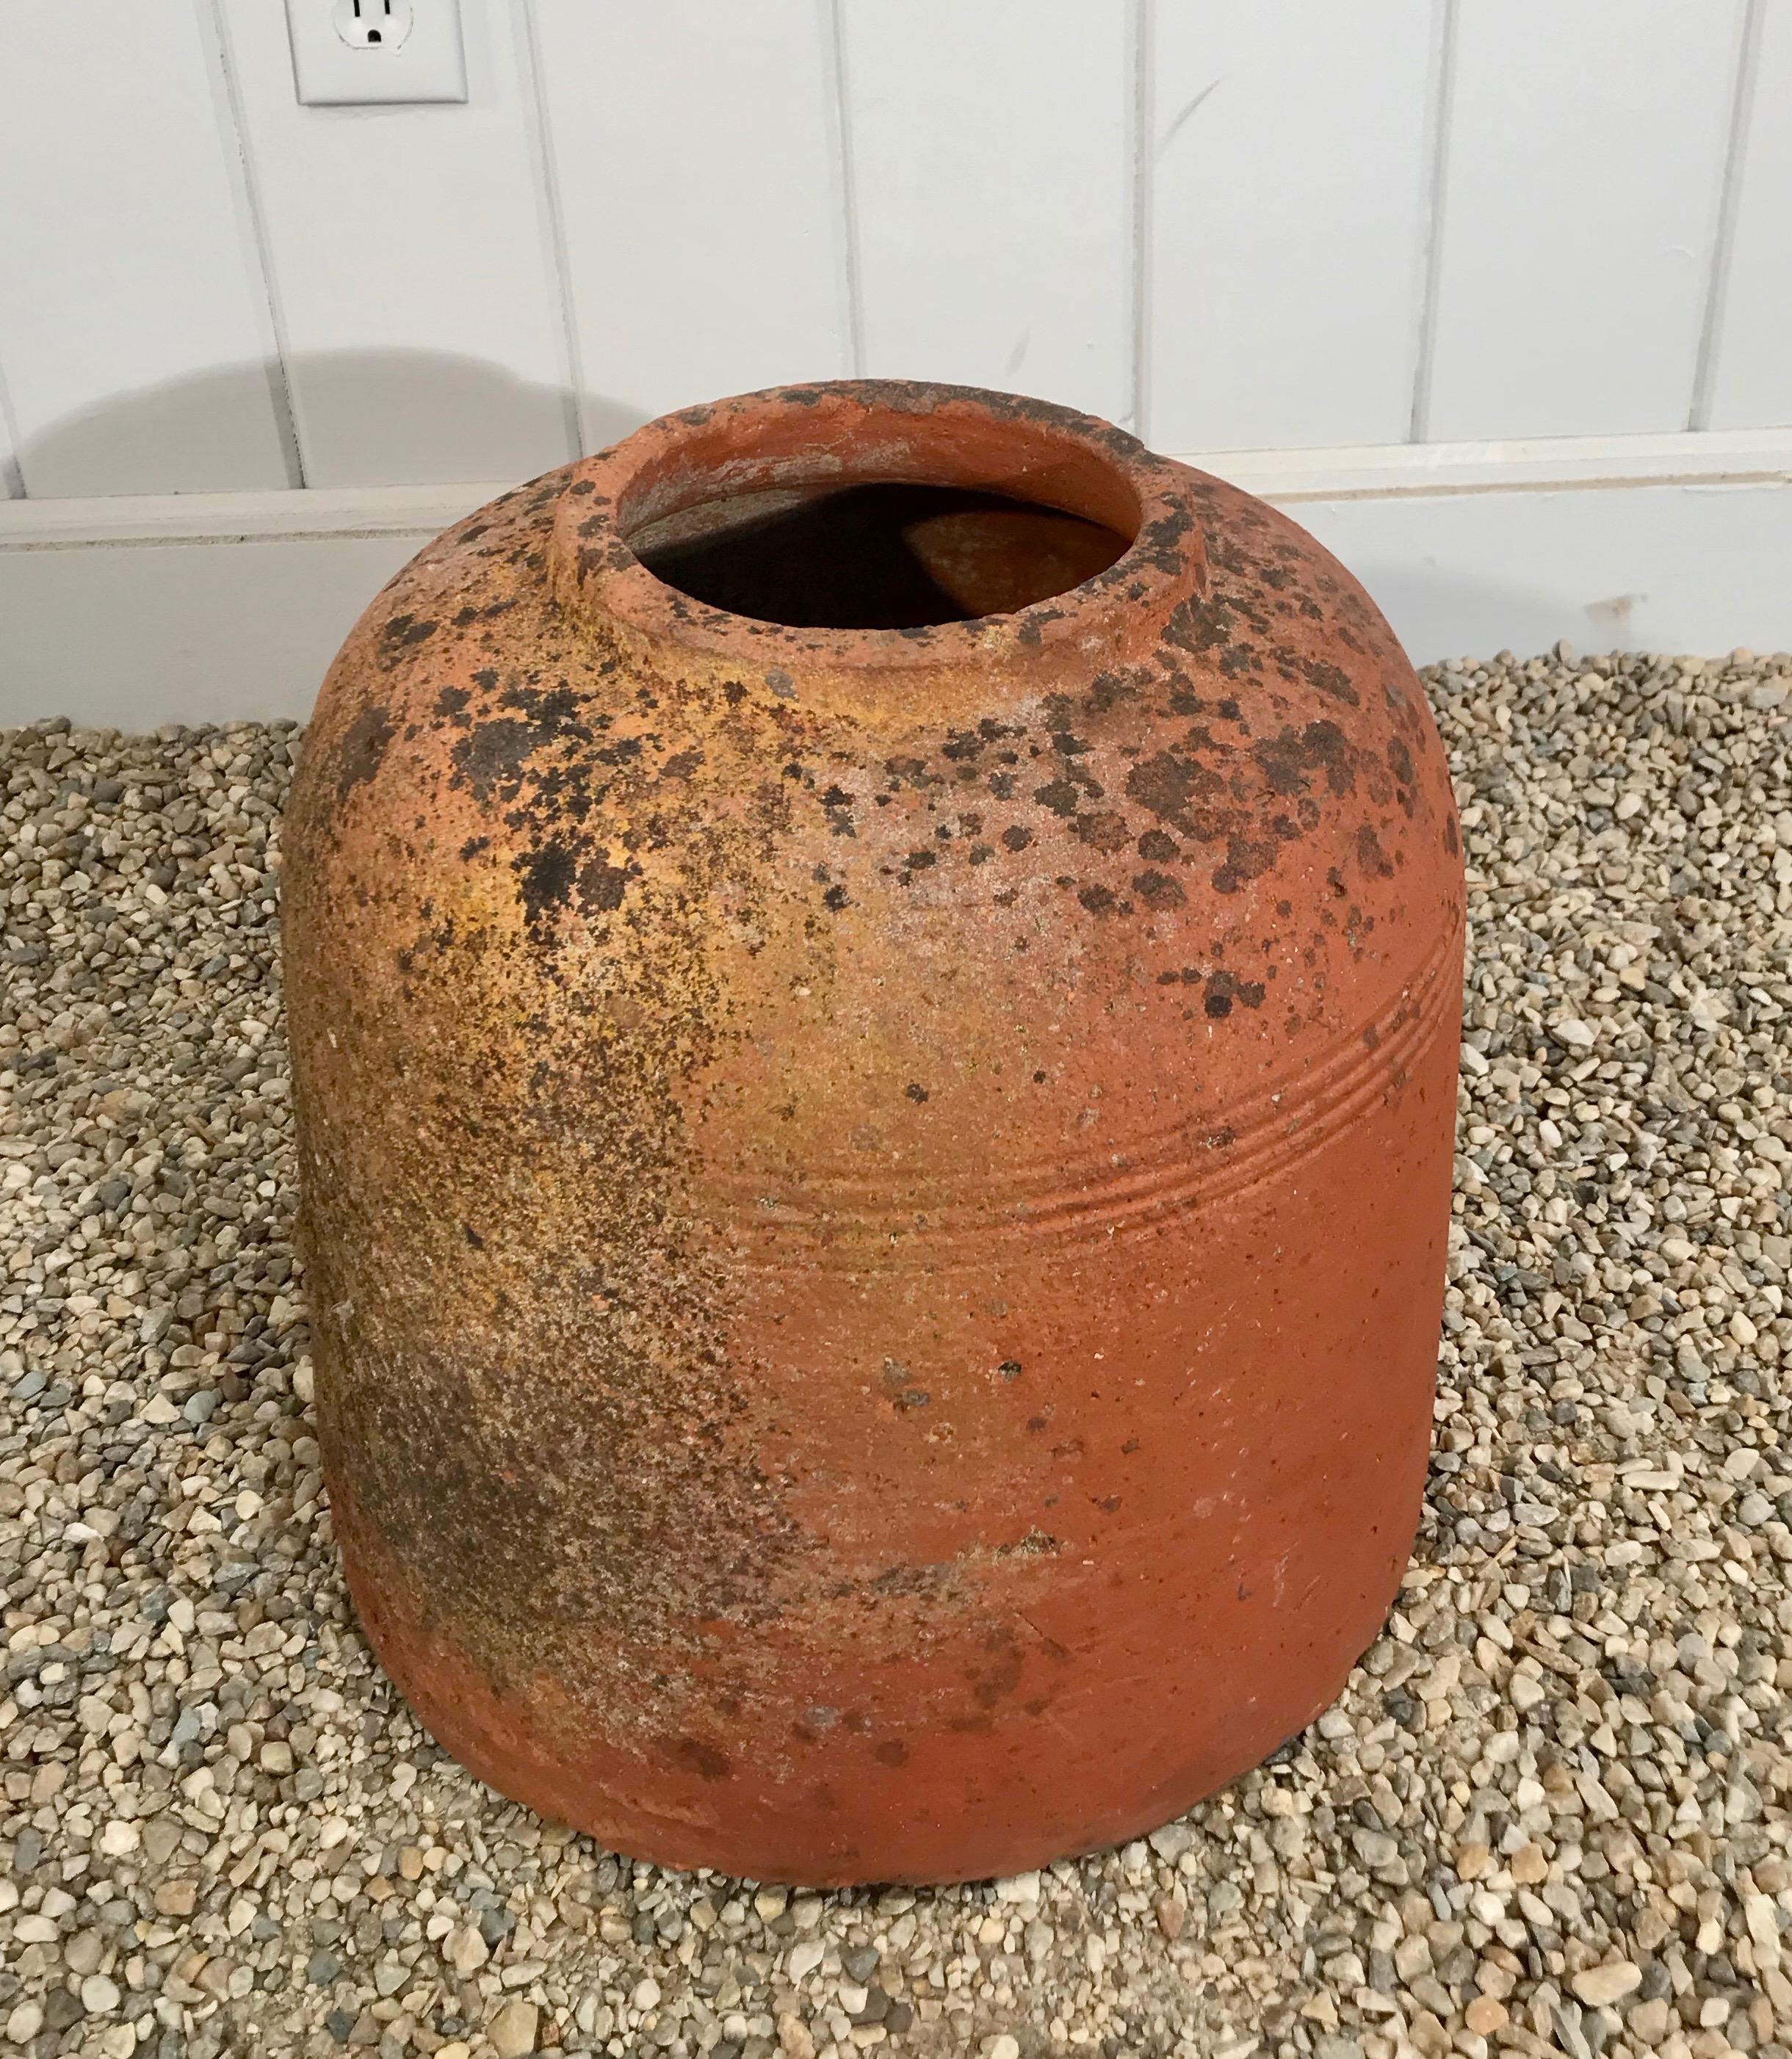 Hand-Crafted Short English Terracotta Kale Forcer Pot with Lovely Patina